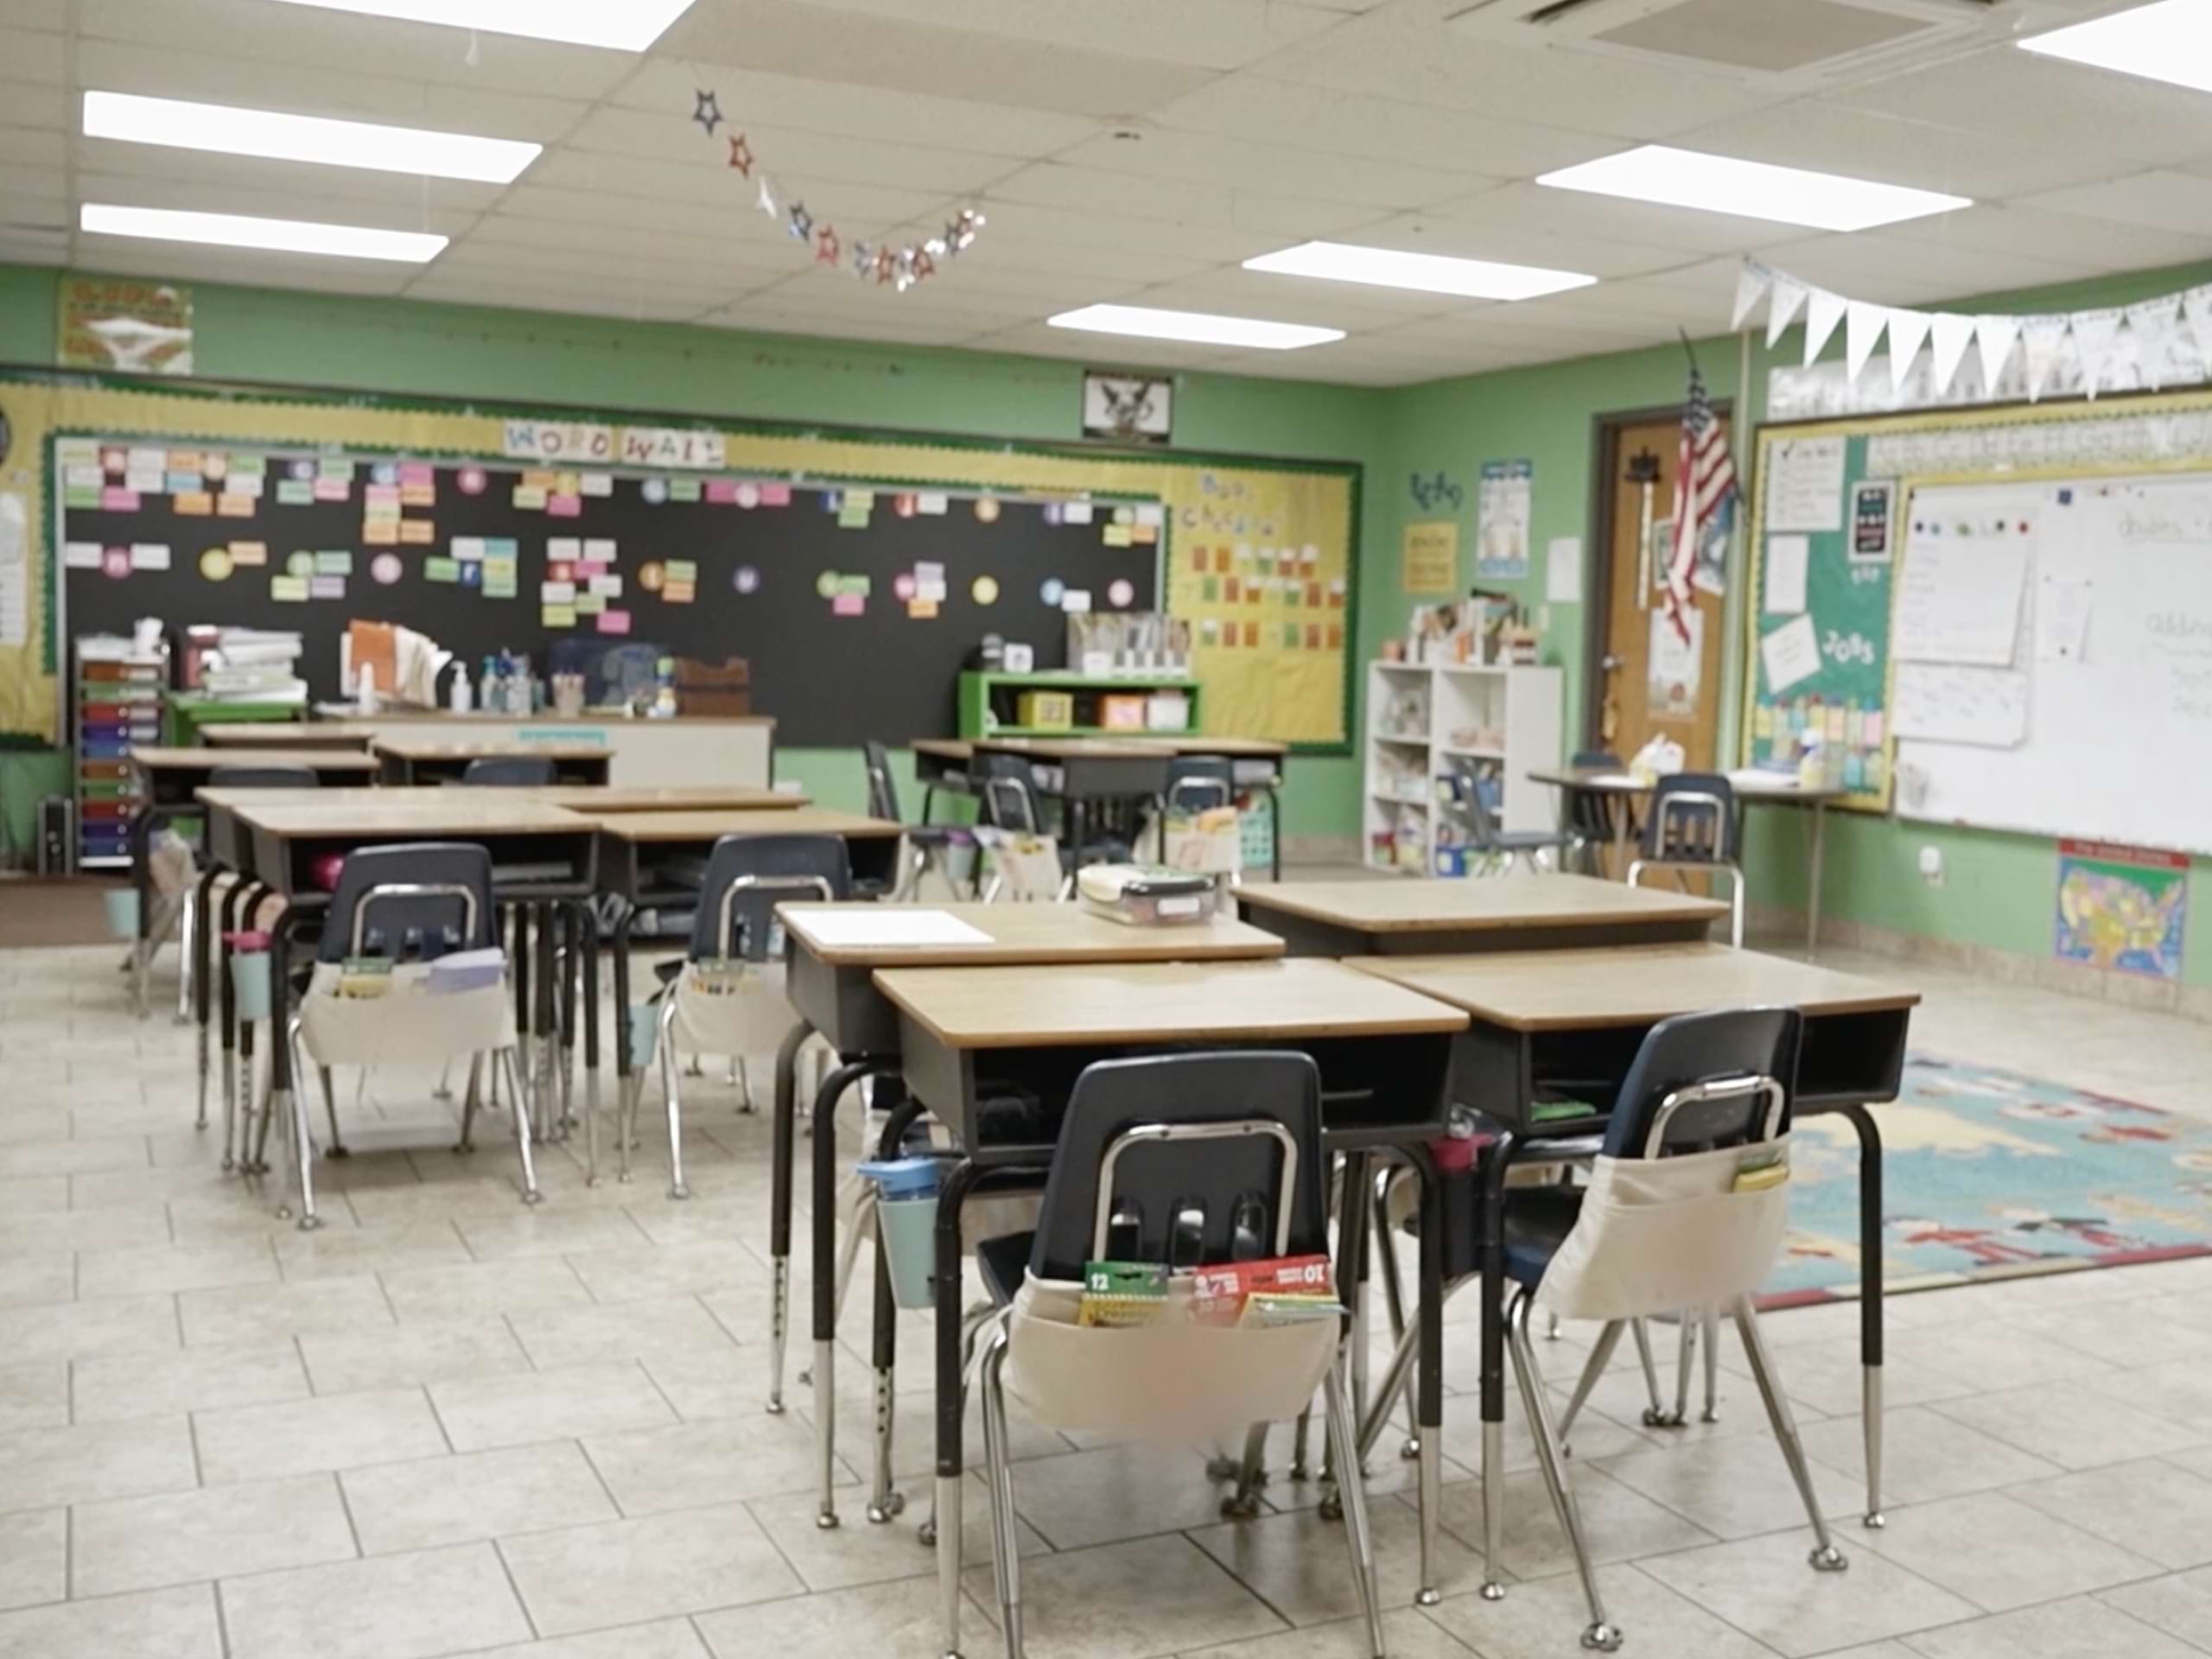 St. James Catholic School: Transforming Learning Environments With VRF